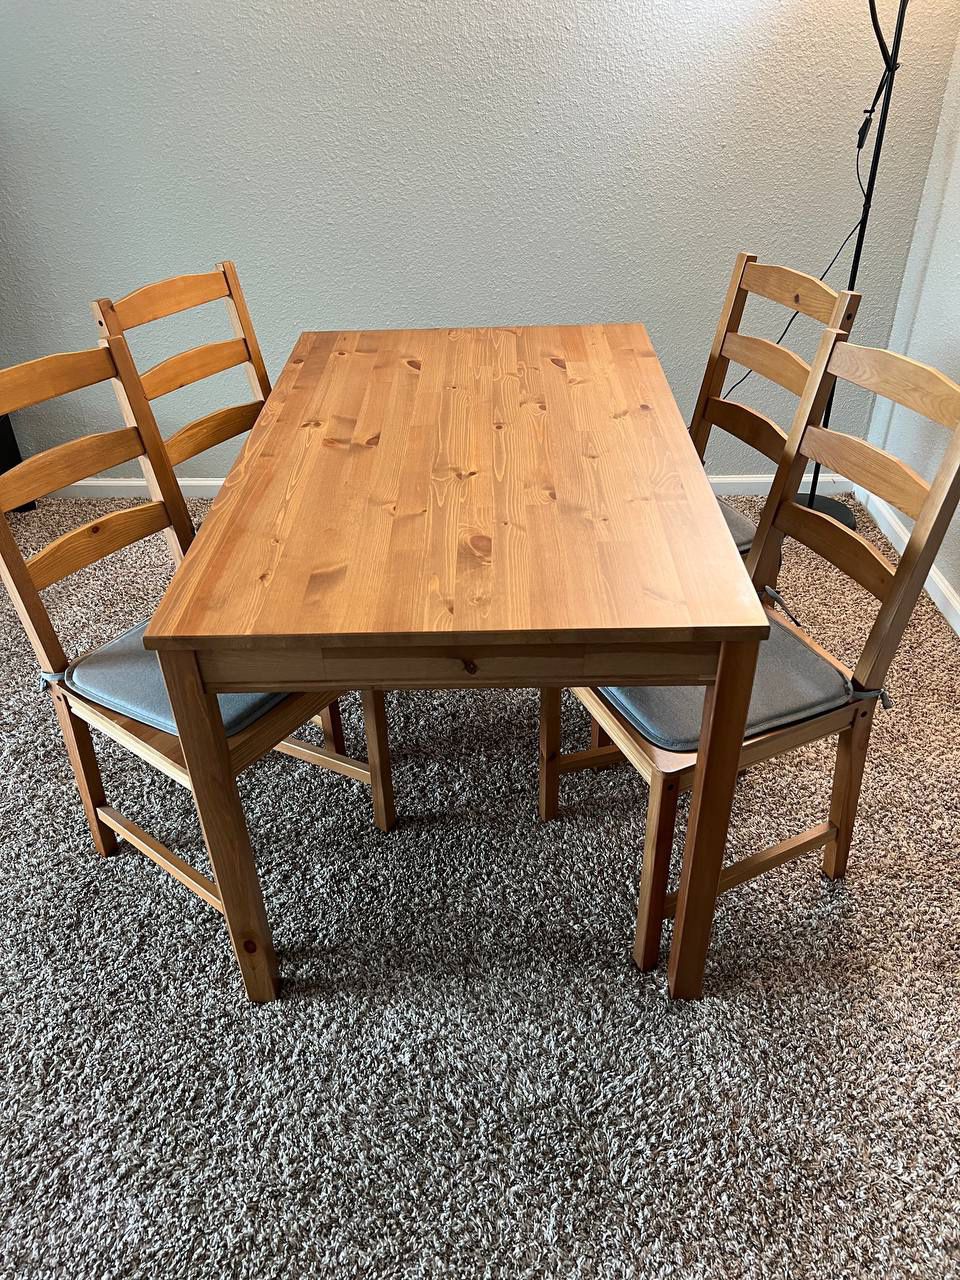 Dining Table With 4 Chairs From Ikea